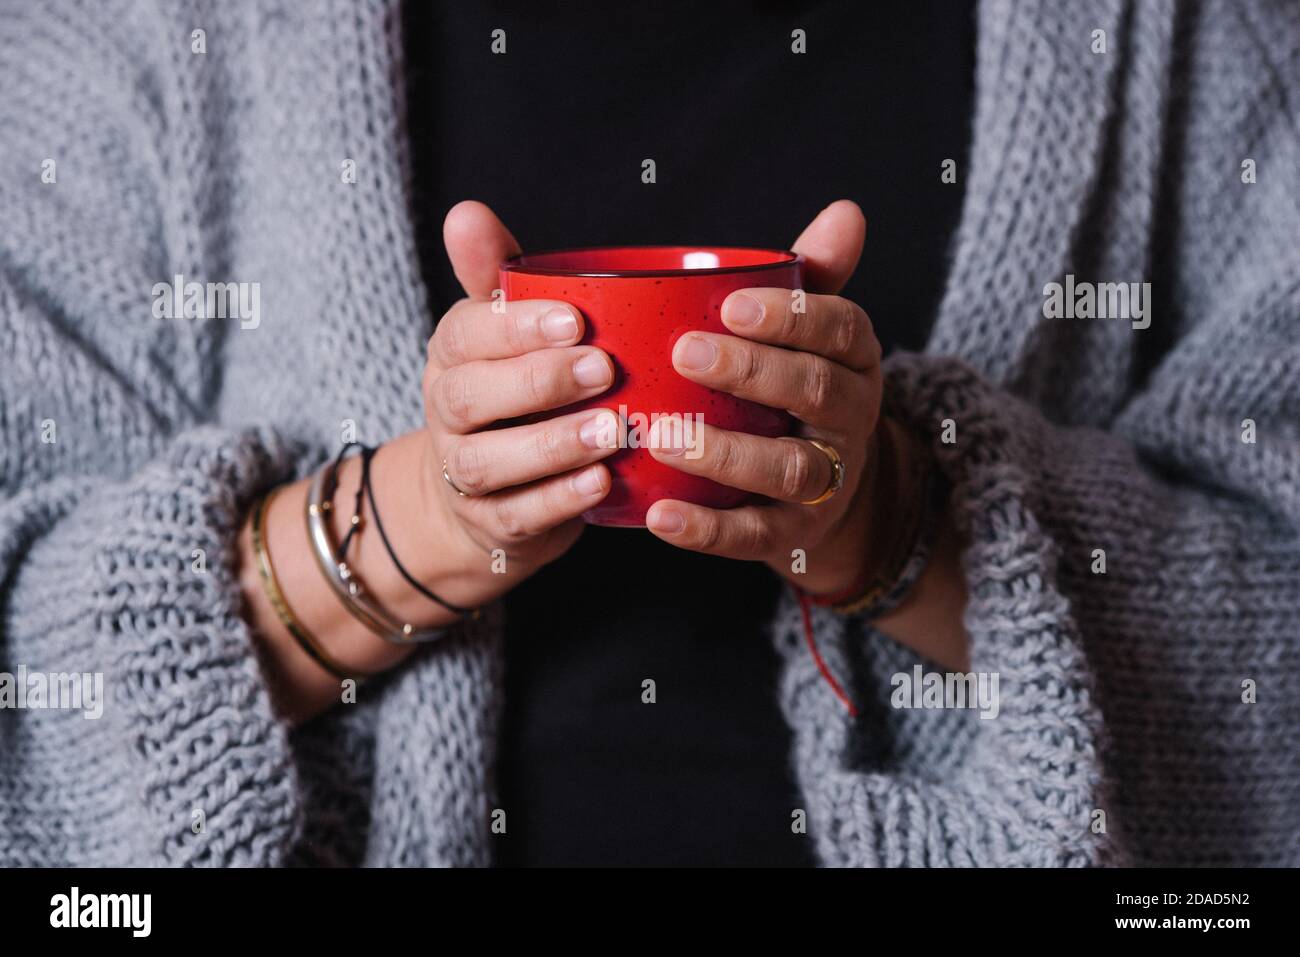 https://c8.alamy.com/comp/2DAD5N2/closeup-of-a-womans-hands-with-a-red-mug-woman-warming-her-hands-with-a-cup-of-coffee-2DAD5N2.jpg